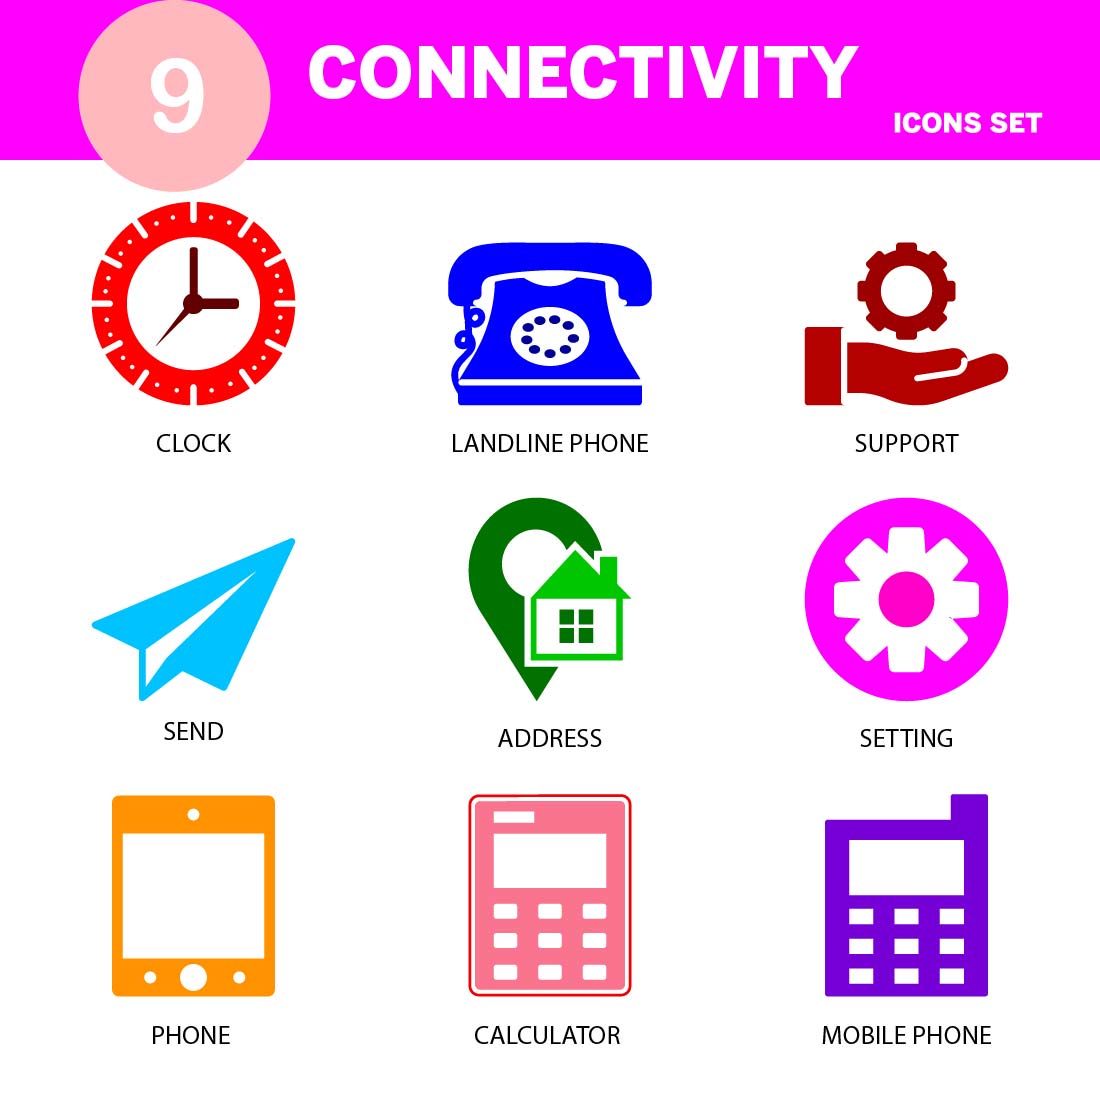 MODERN CONNECTIVITY ICON SET COLOR EDITABLE AND RICBALE cover image.